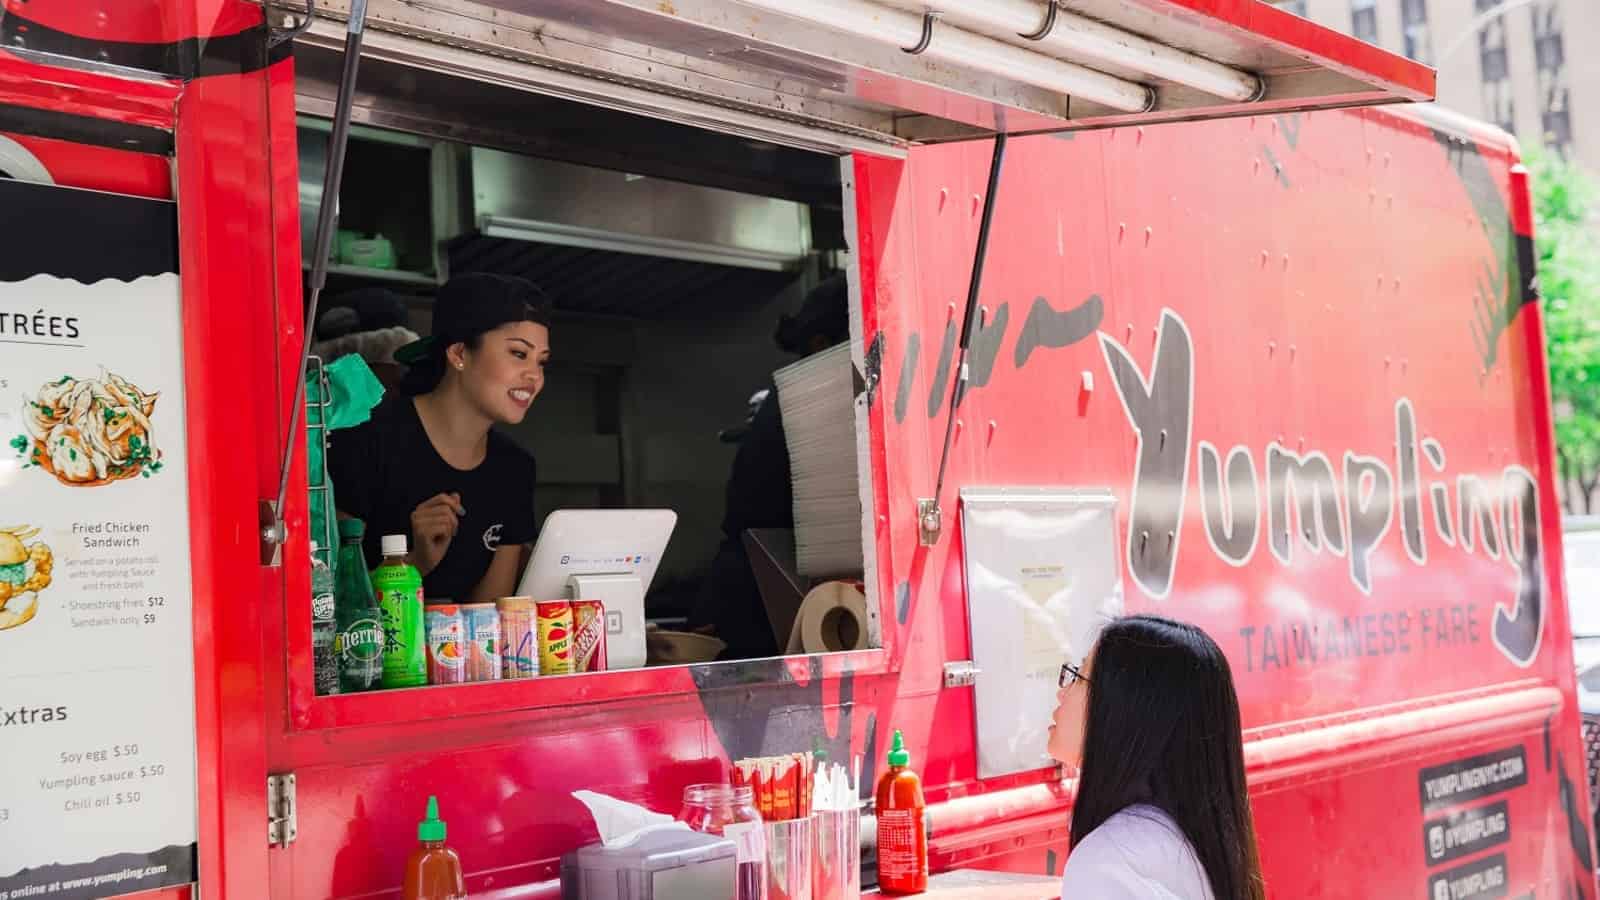 a person standing behind a red food truck